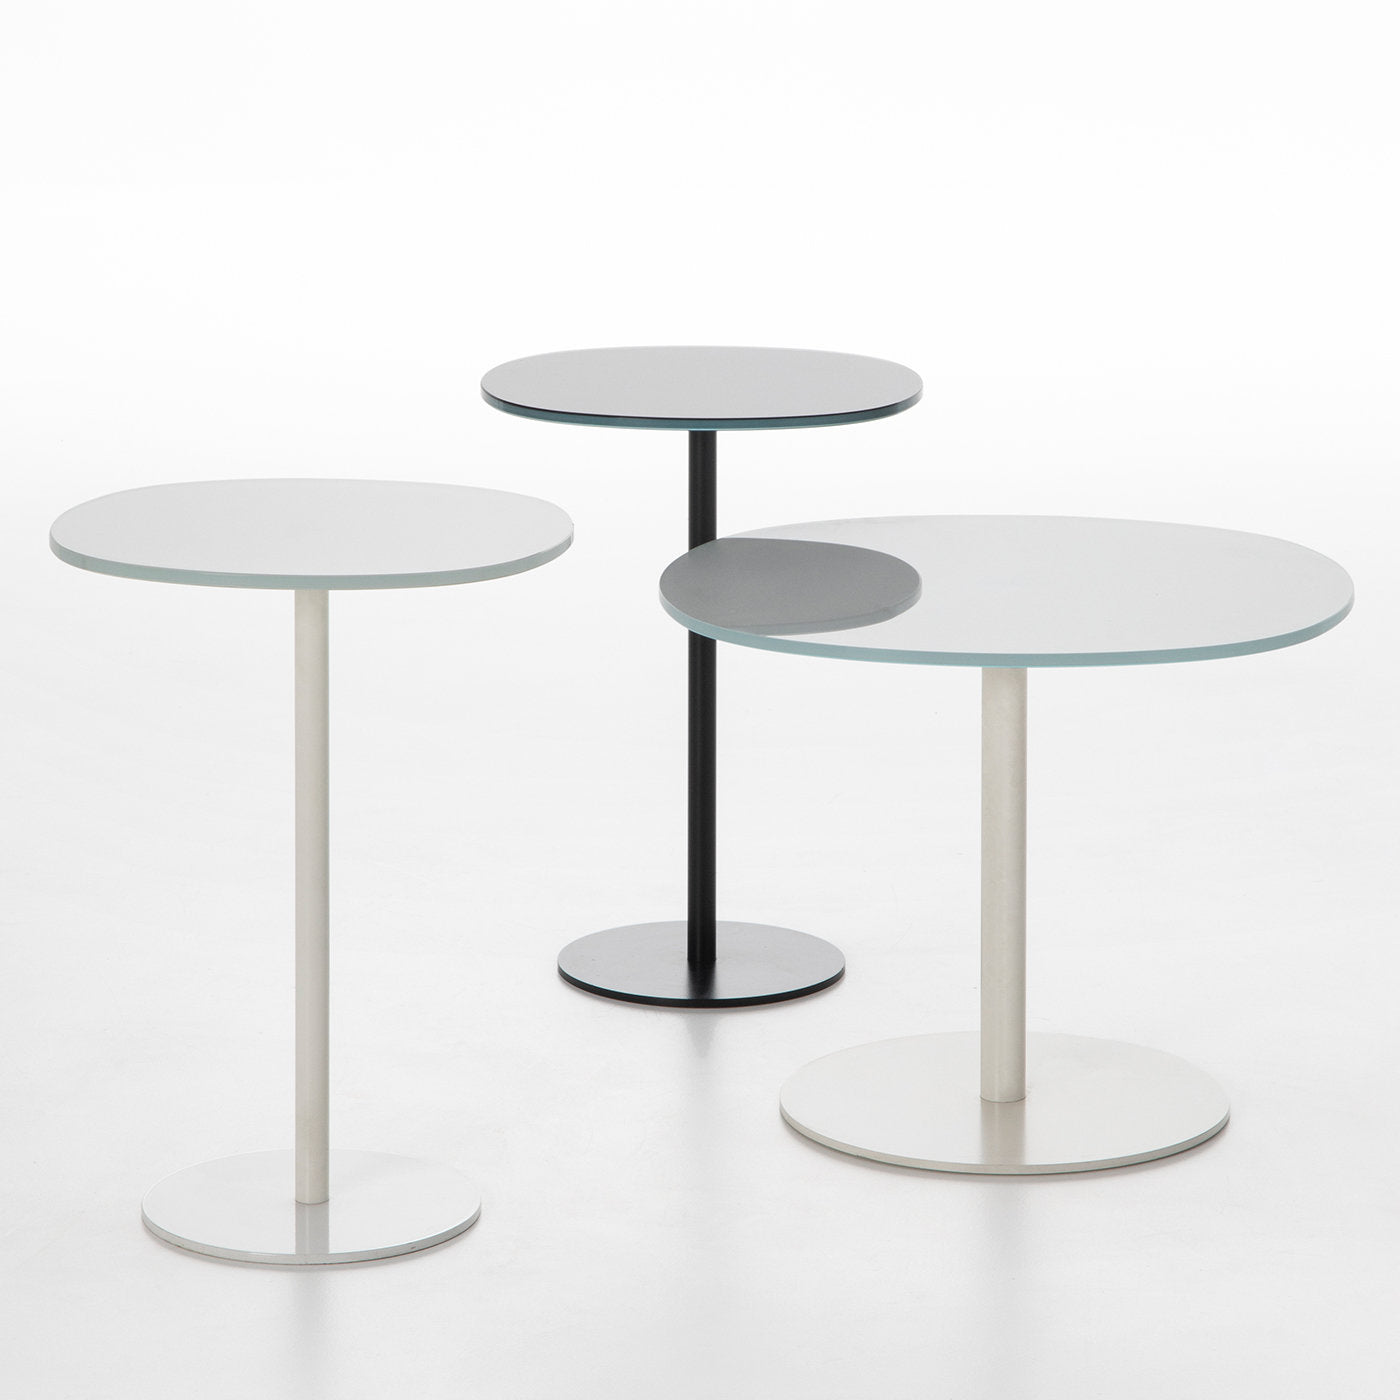 Solenoide Black Tall Side Table by Piero Lissoni - Alternative view 1